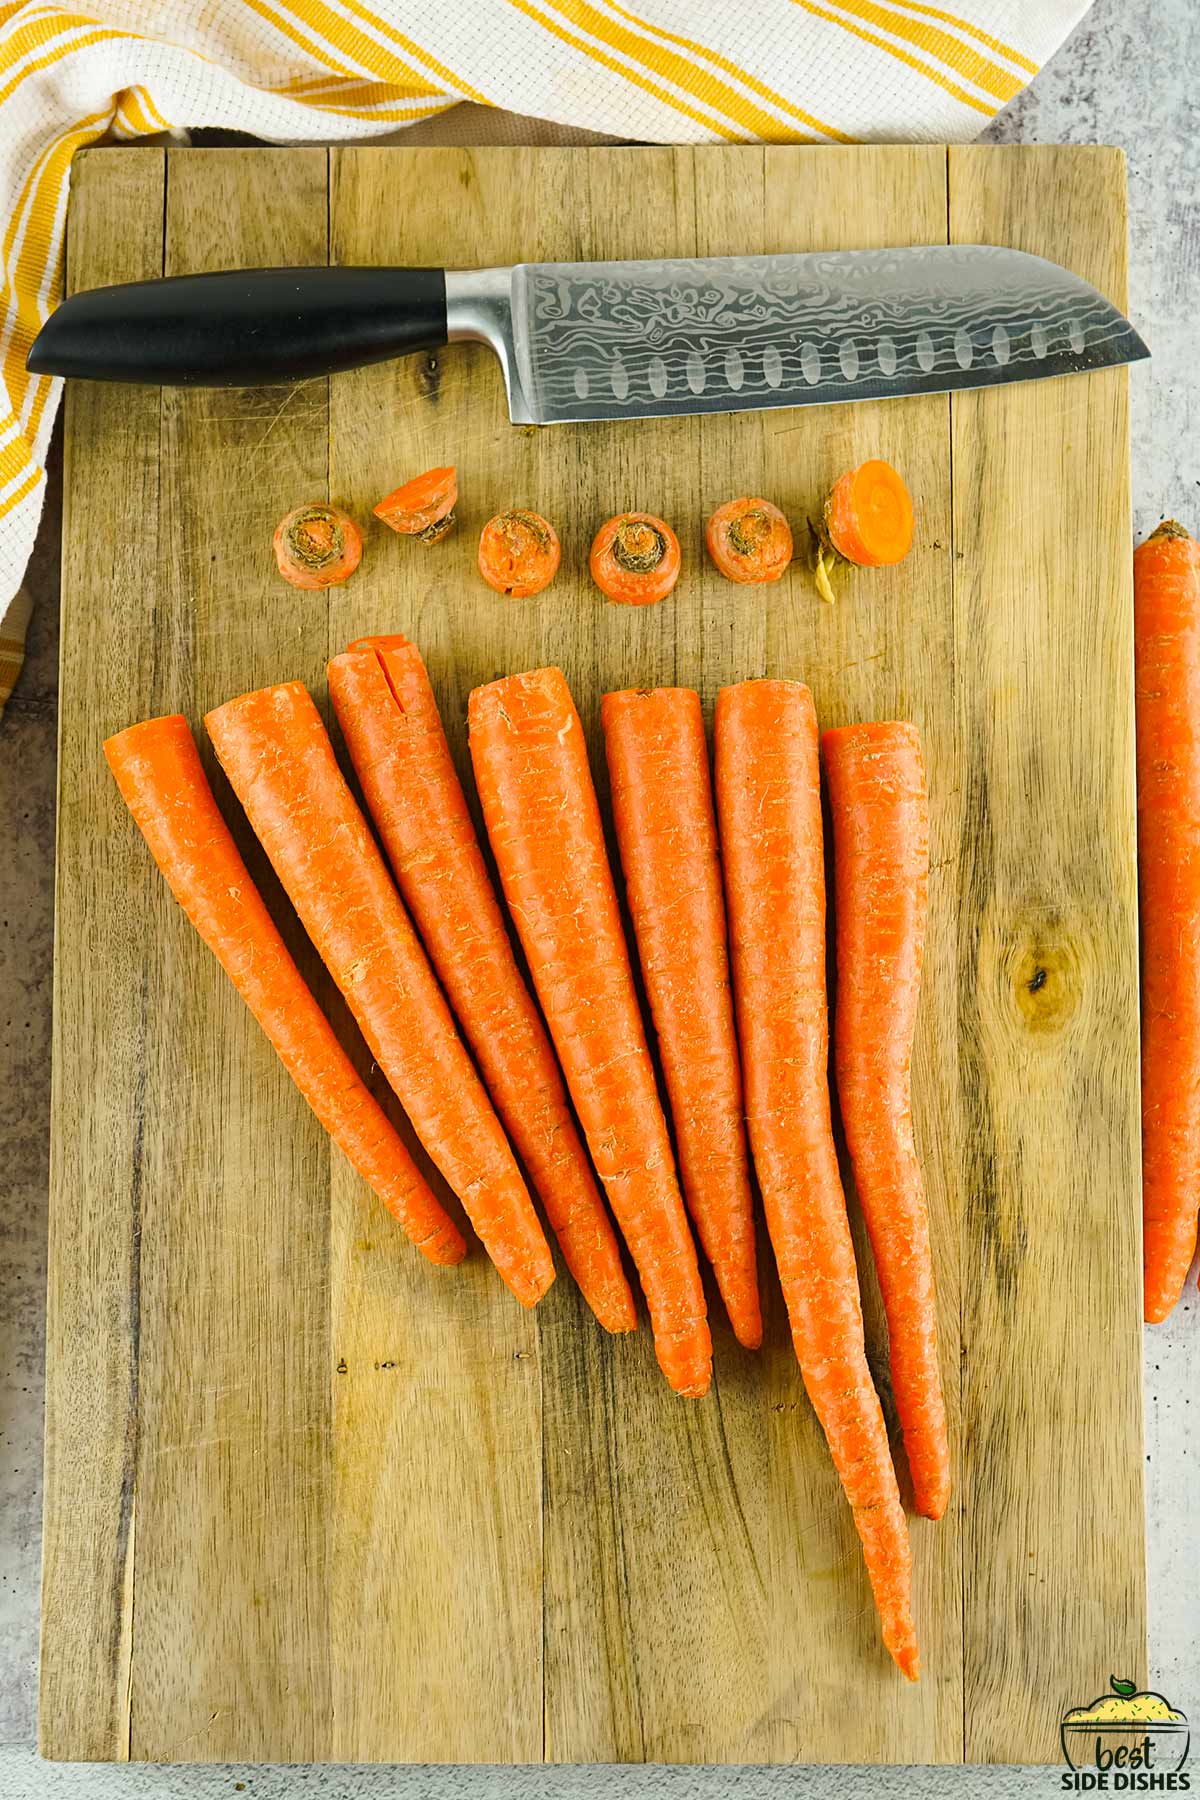 carrots lined up on a wooden cutting board with the tops cut off, next to a knife